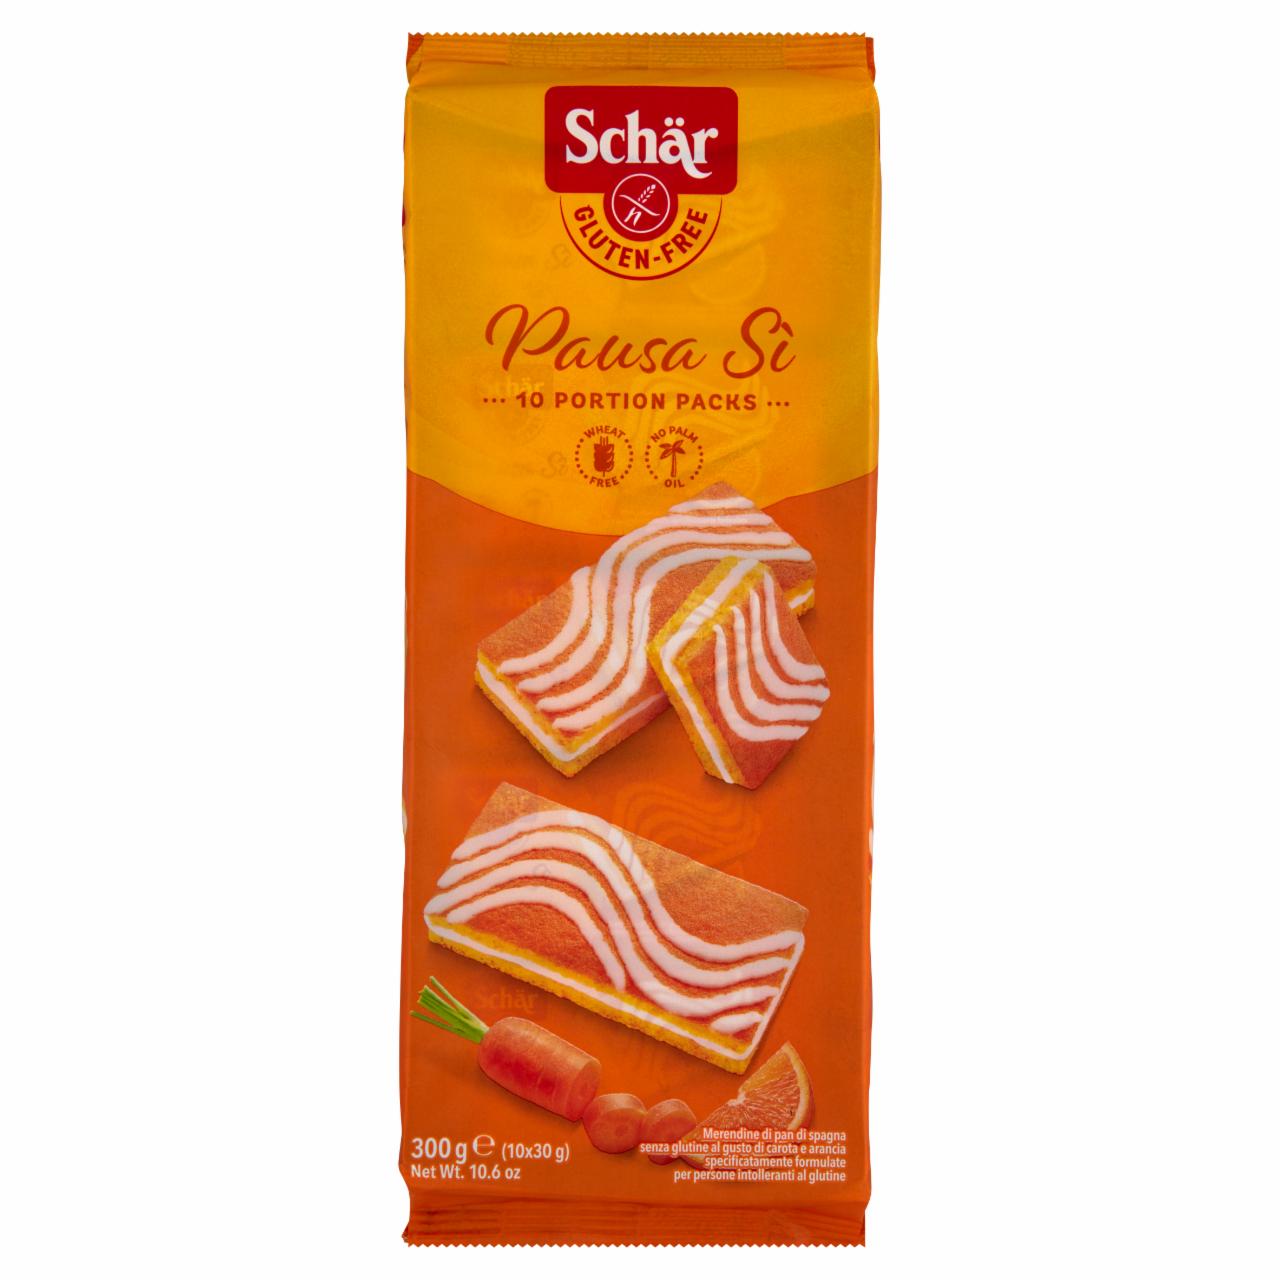 Photo - Schär Pausa Sí Gluten Free Sponge Cakes with Carrot and Orange Flavour 10 x 30 g (300 g)